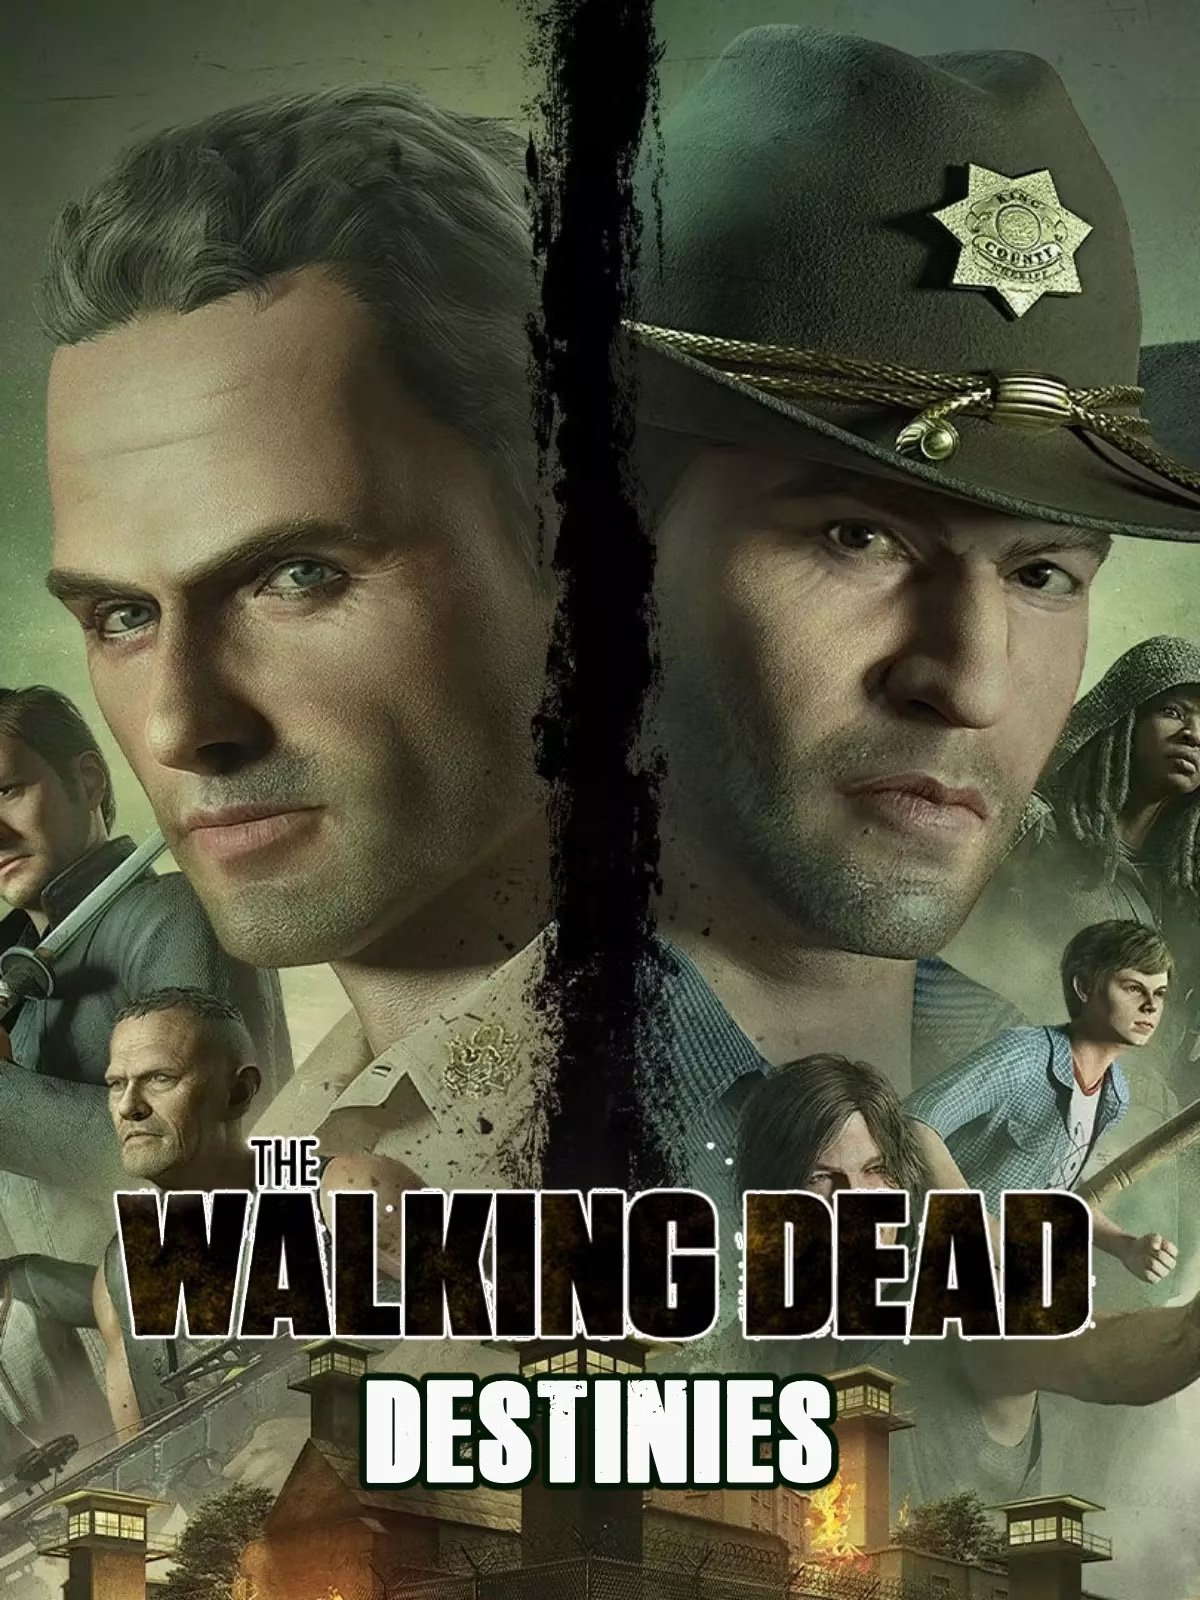 the-walking-dead-destinies-game-poster.jpeg